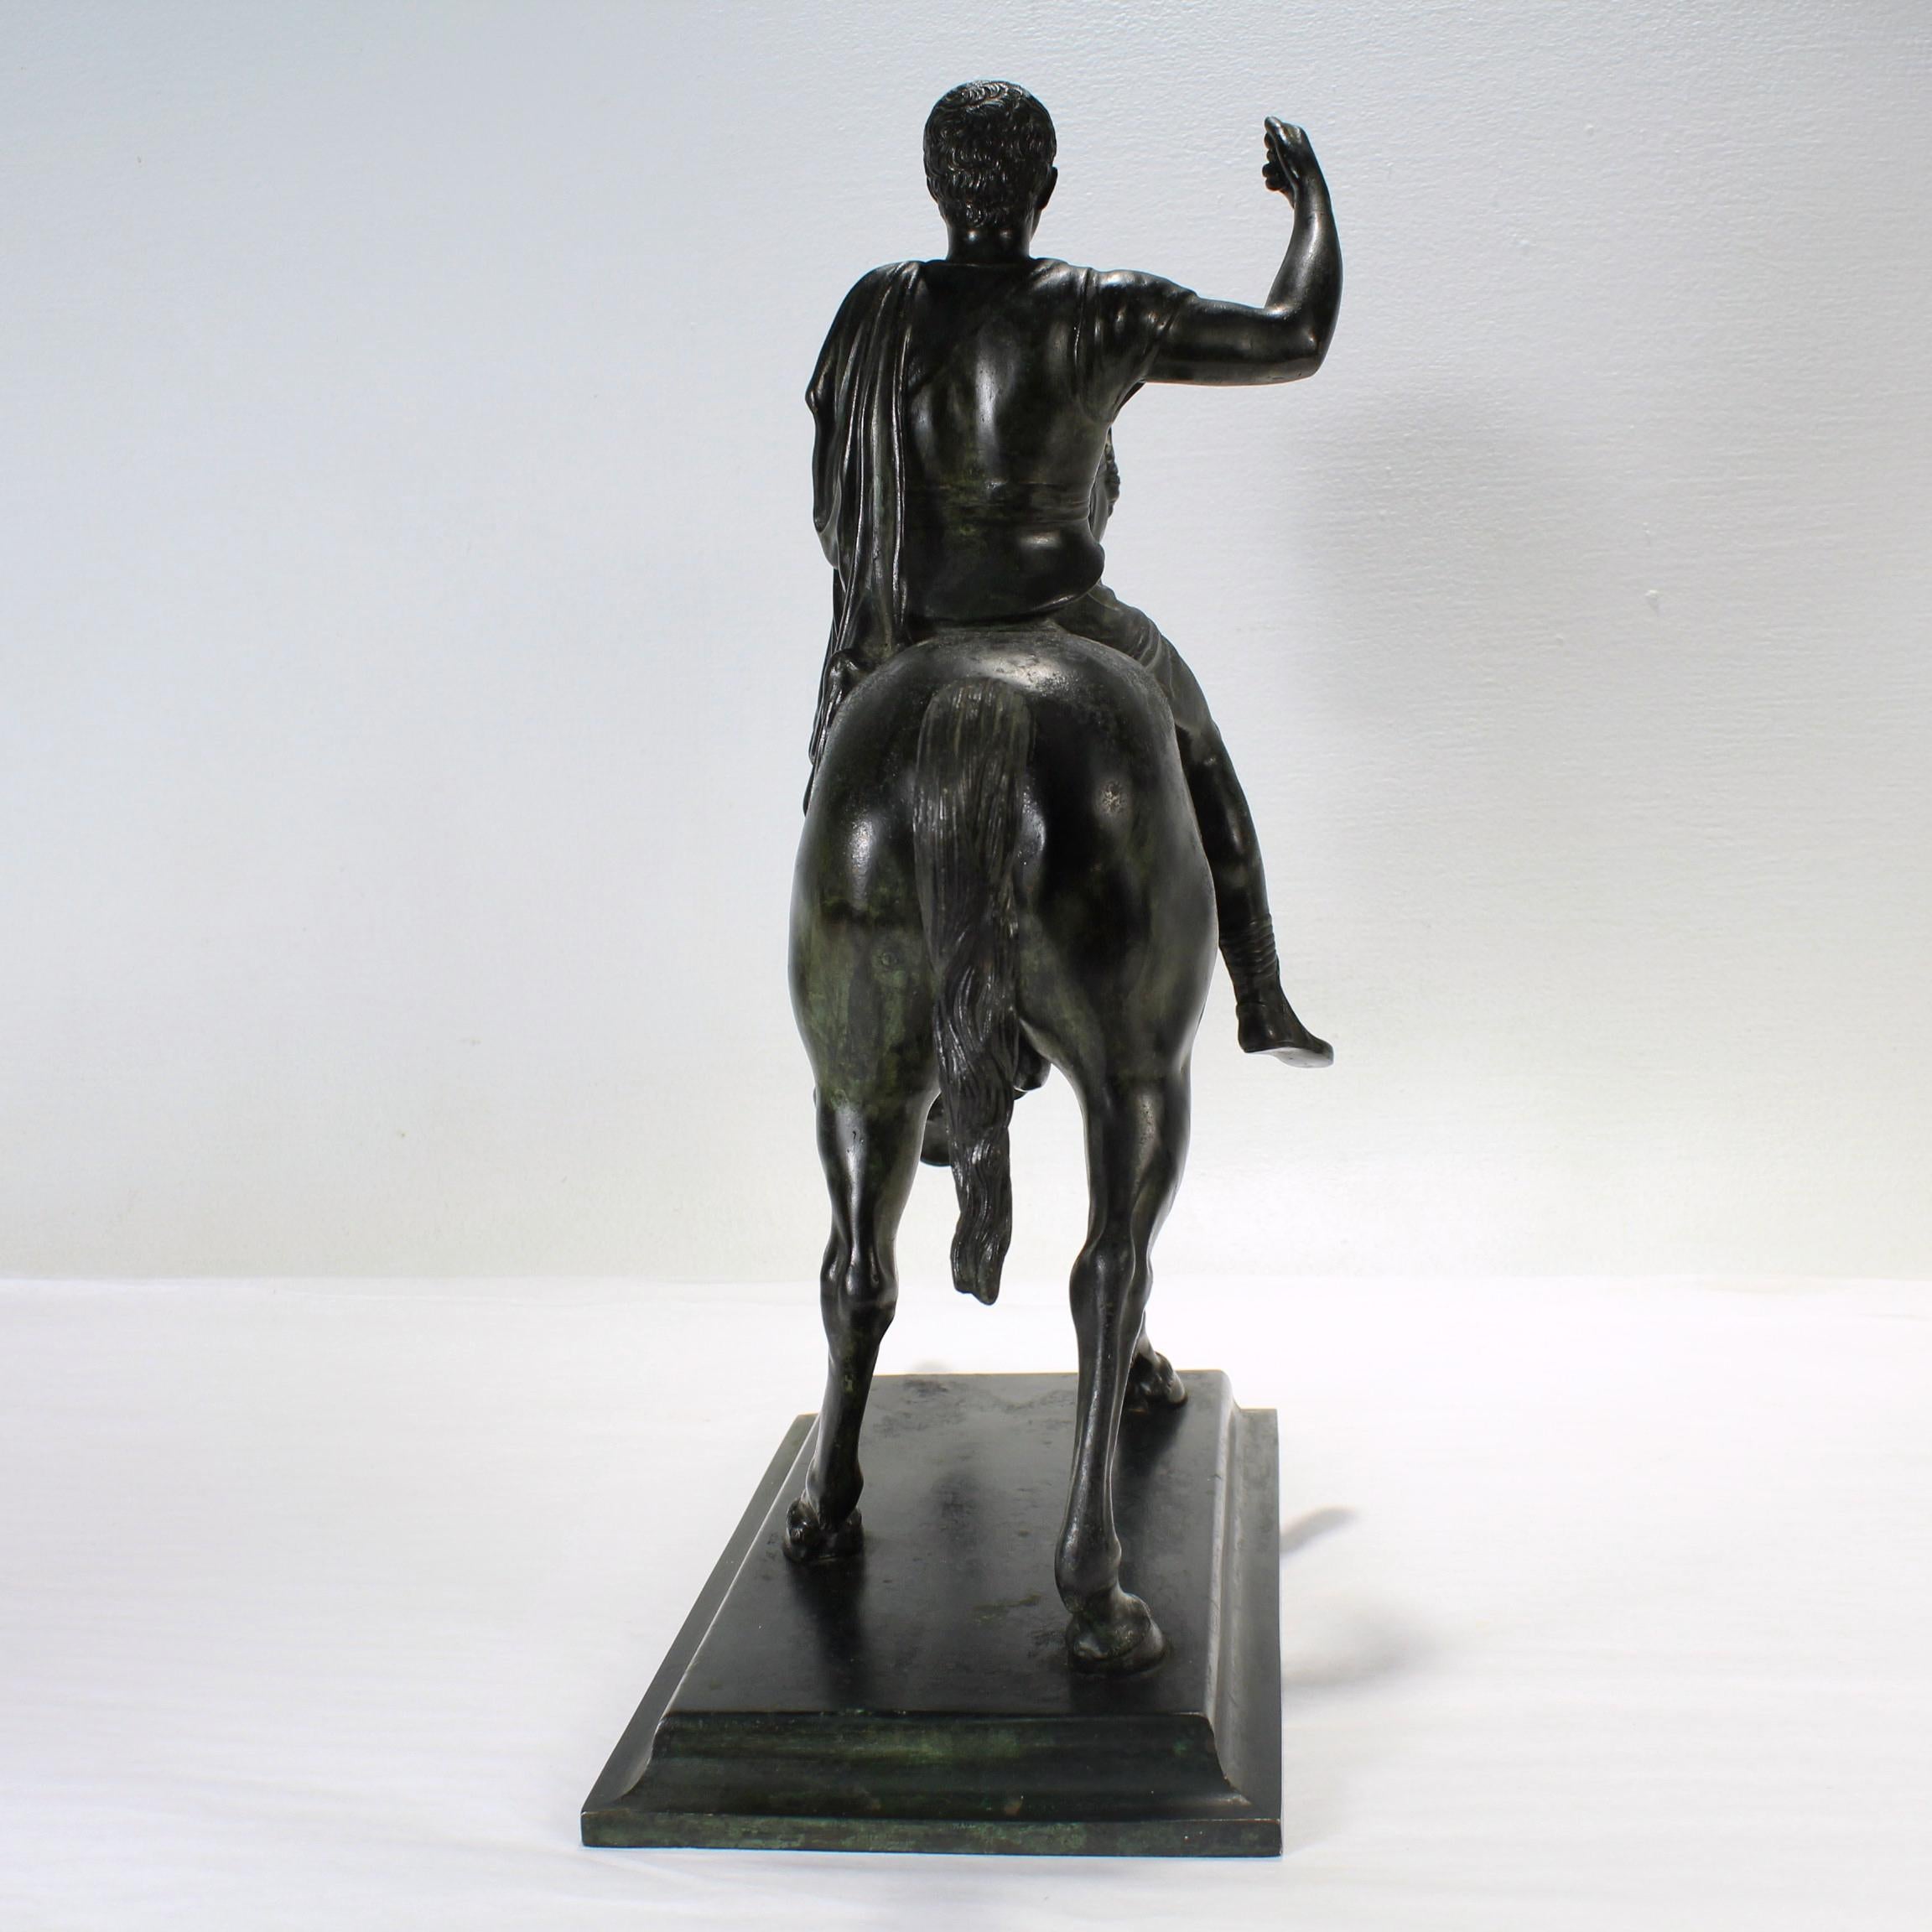 A finely cast table-scale Grand Tour style bronze sculpture after the antique.

Depicting either Marcus Aurelius or Caesar on horseback. 

With a modeled black and verdigris patina. 

Simply a finely cast model! 

Date:
20th